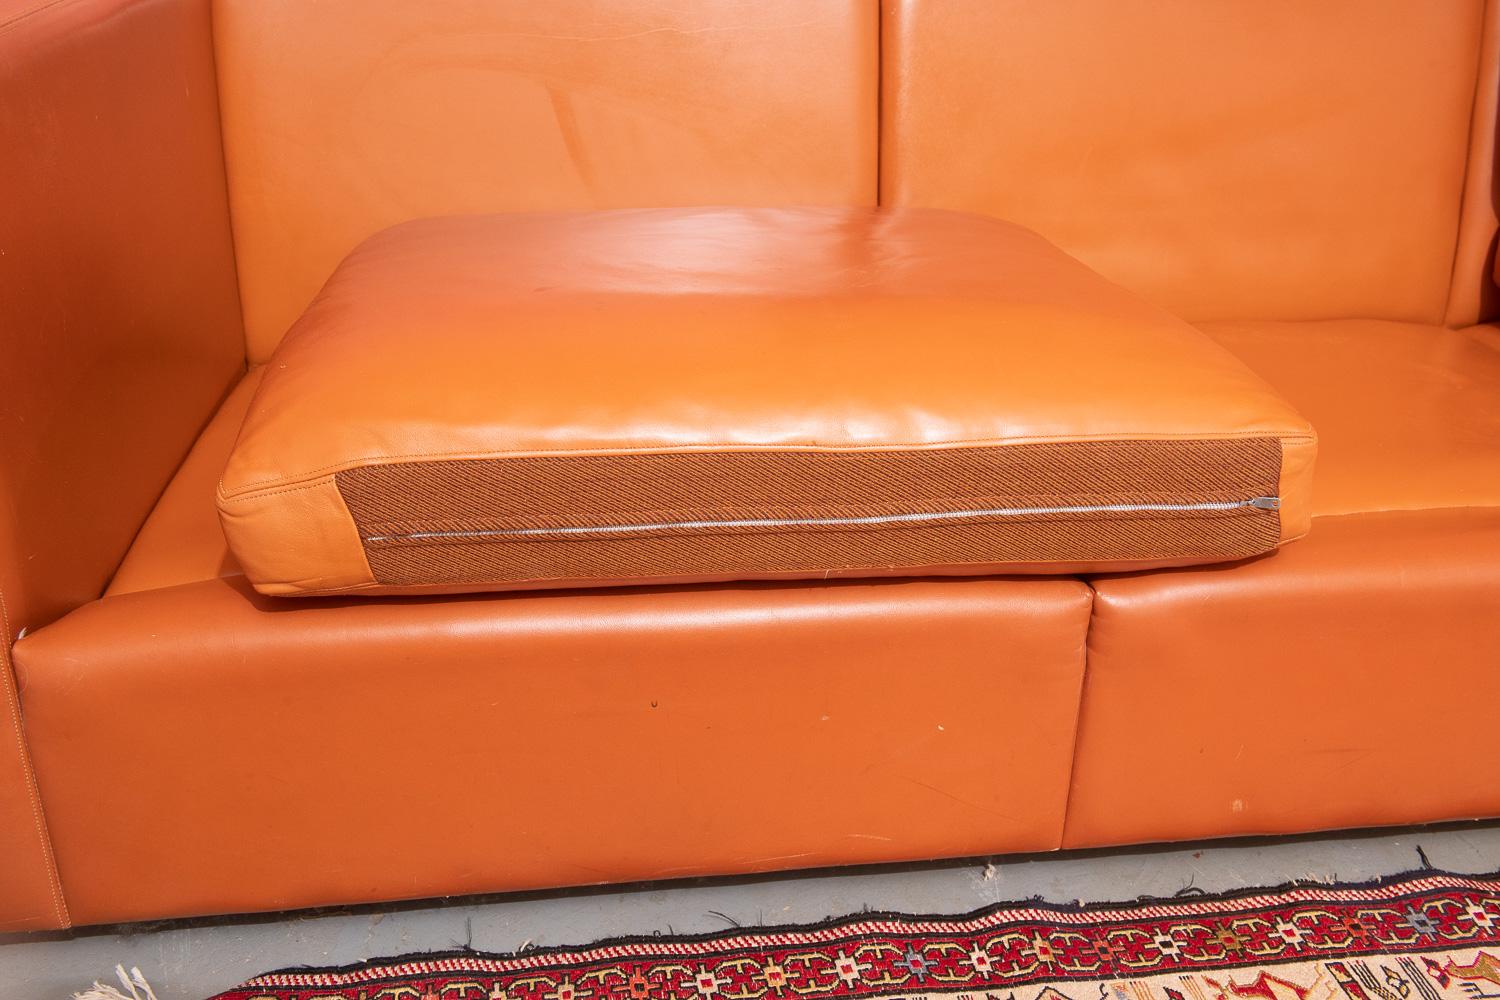 Mid-Century Modern Knoll Sofa by Charles Pfister 1971 Original Sabrina Leather, #1, '2 Available' For Sale